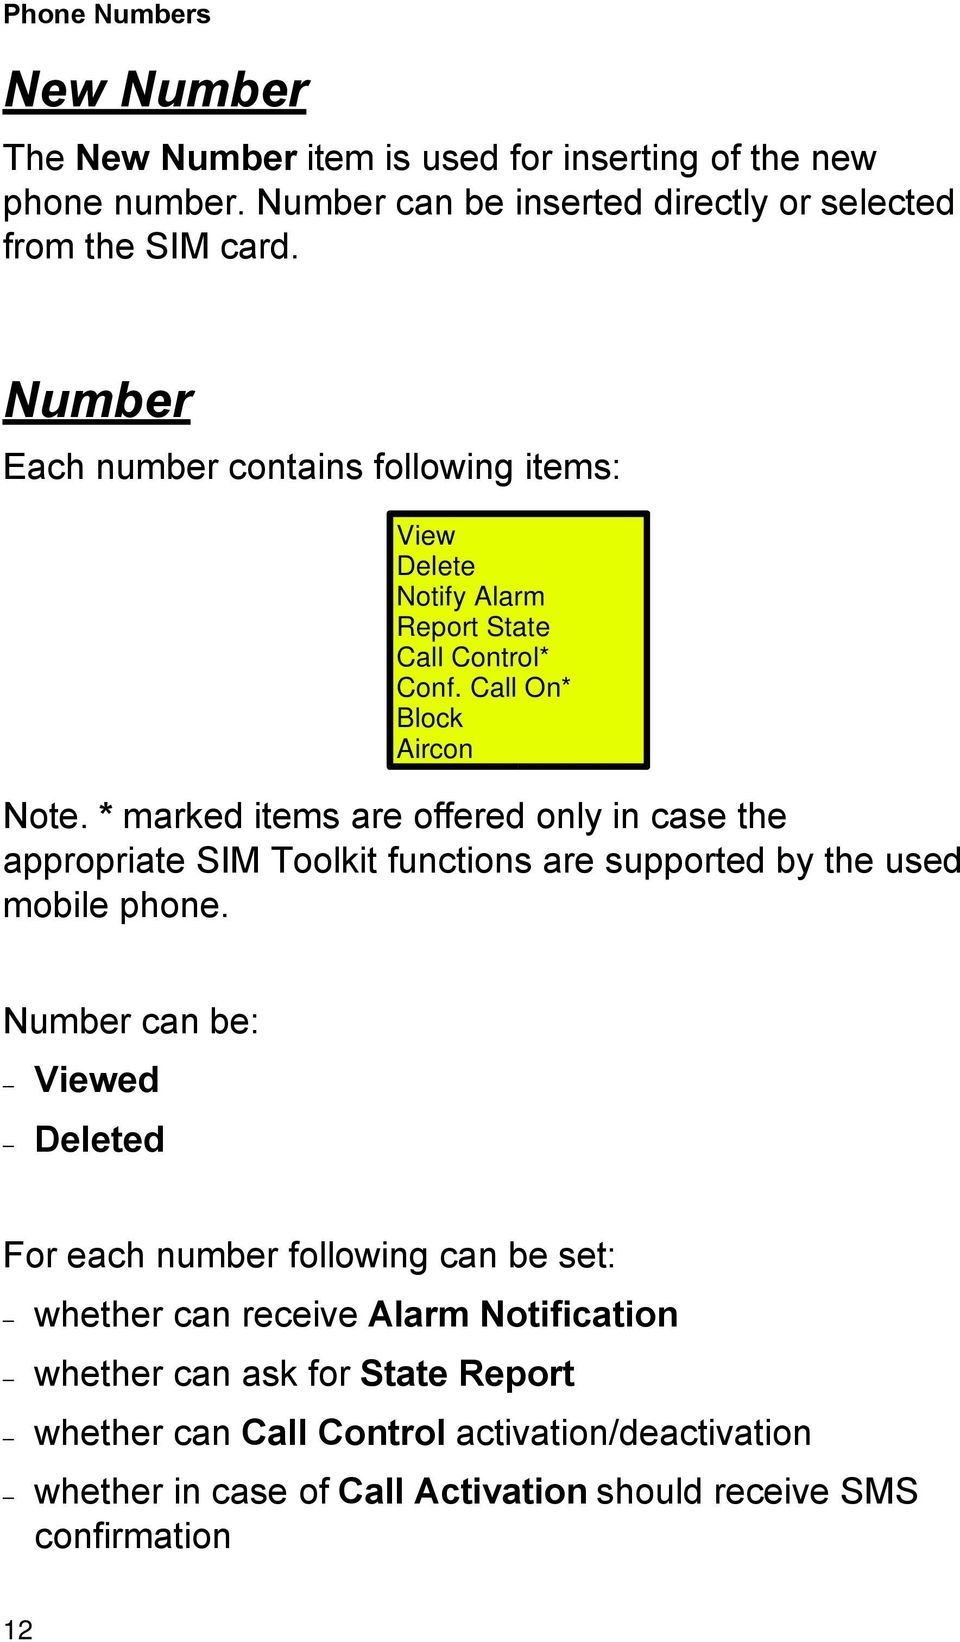 * marked items are offered only in case the appropriate SIM Toolkit functions are supported by the used mobile phone.